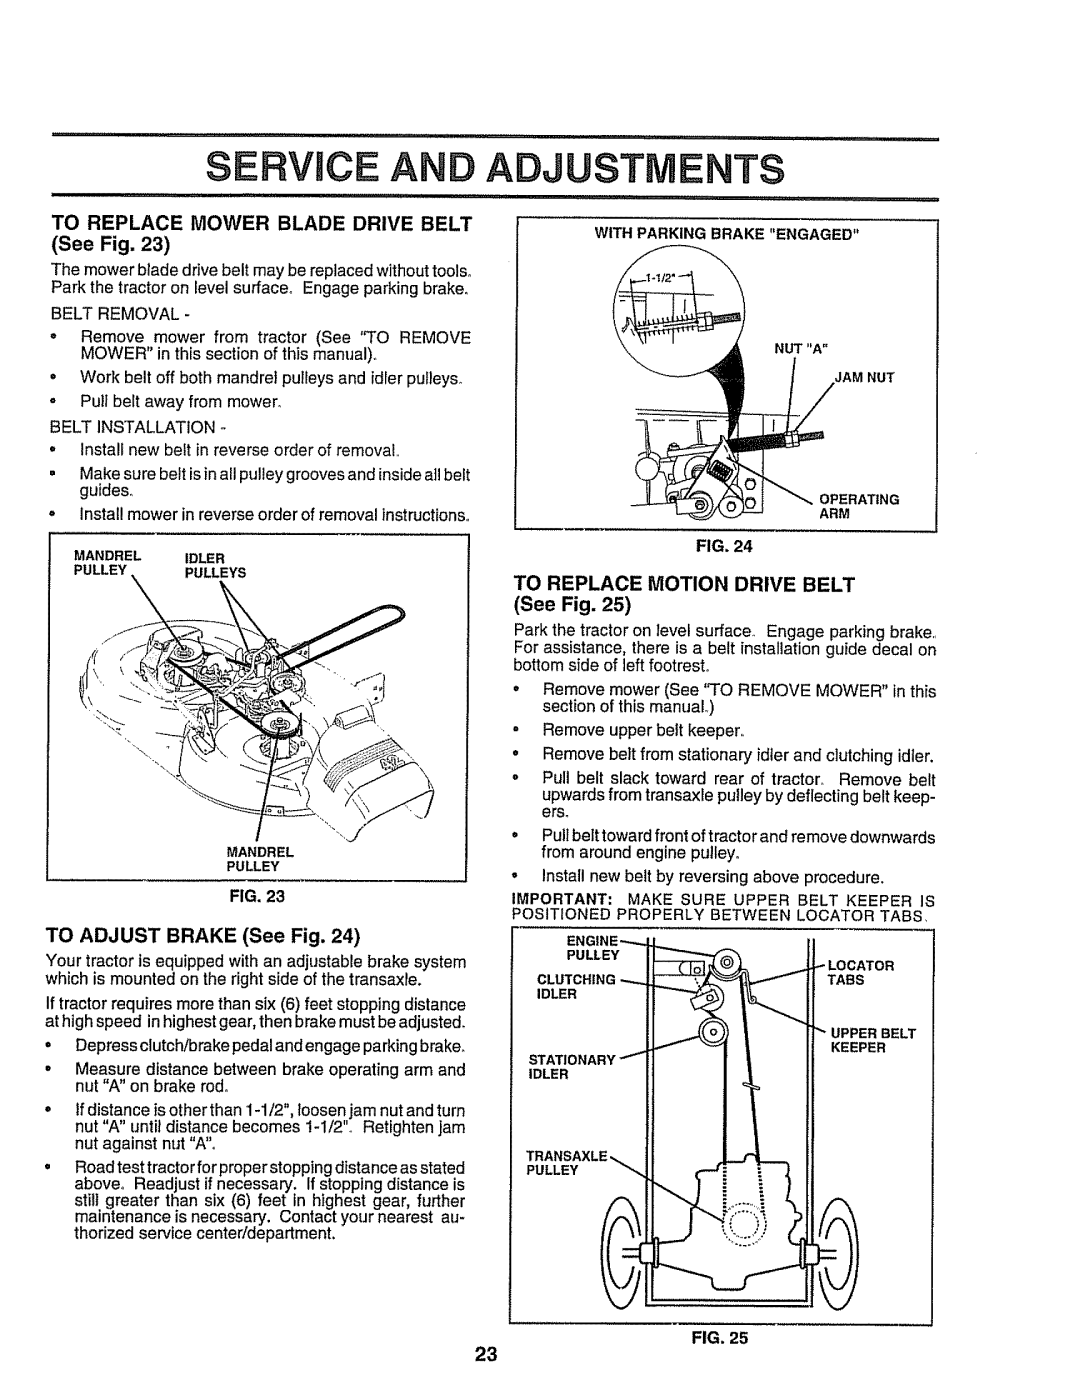 Sears 917.258473 Ce And Adjustments, TO REPLACE MOWER BLADE DRIVE BELT See Fig, TO REPLACE MOTION DRIVE BELT See Fig 